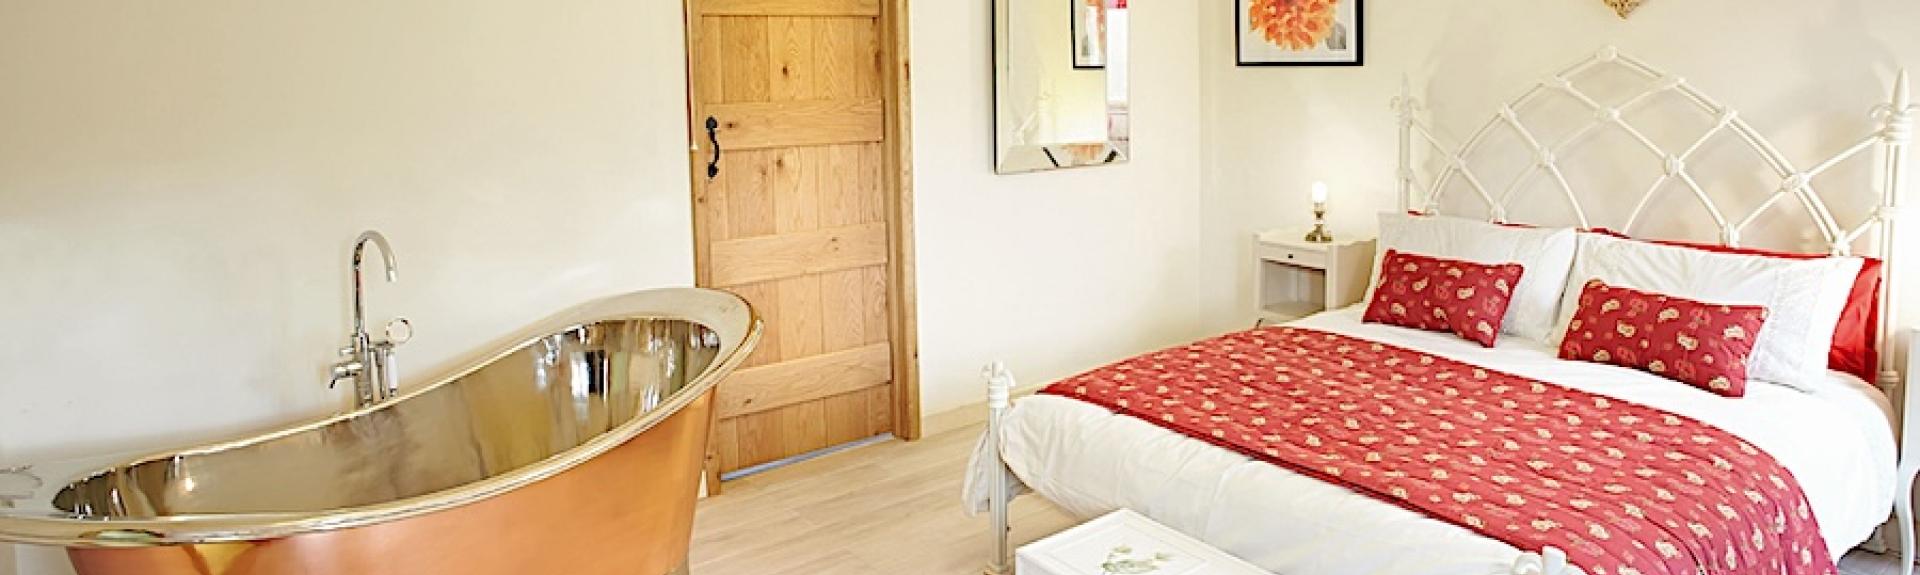 A spacious double-bedroom with a bed and deep, polished copper bath.